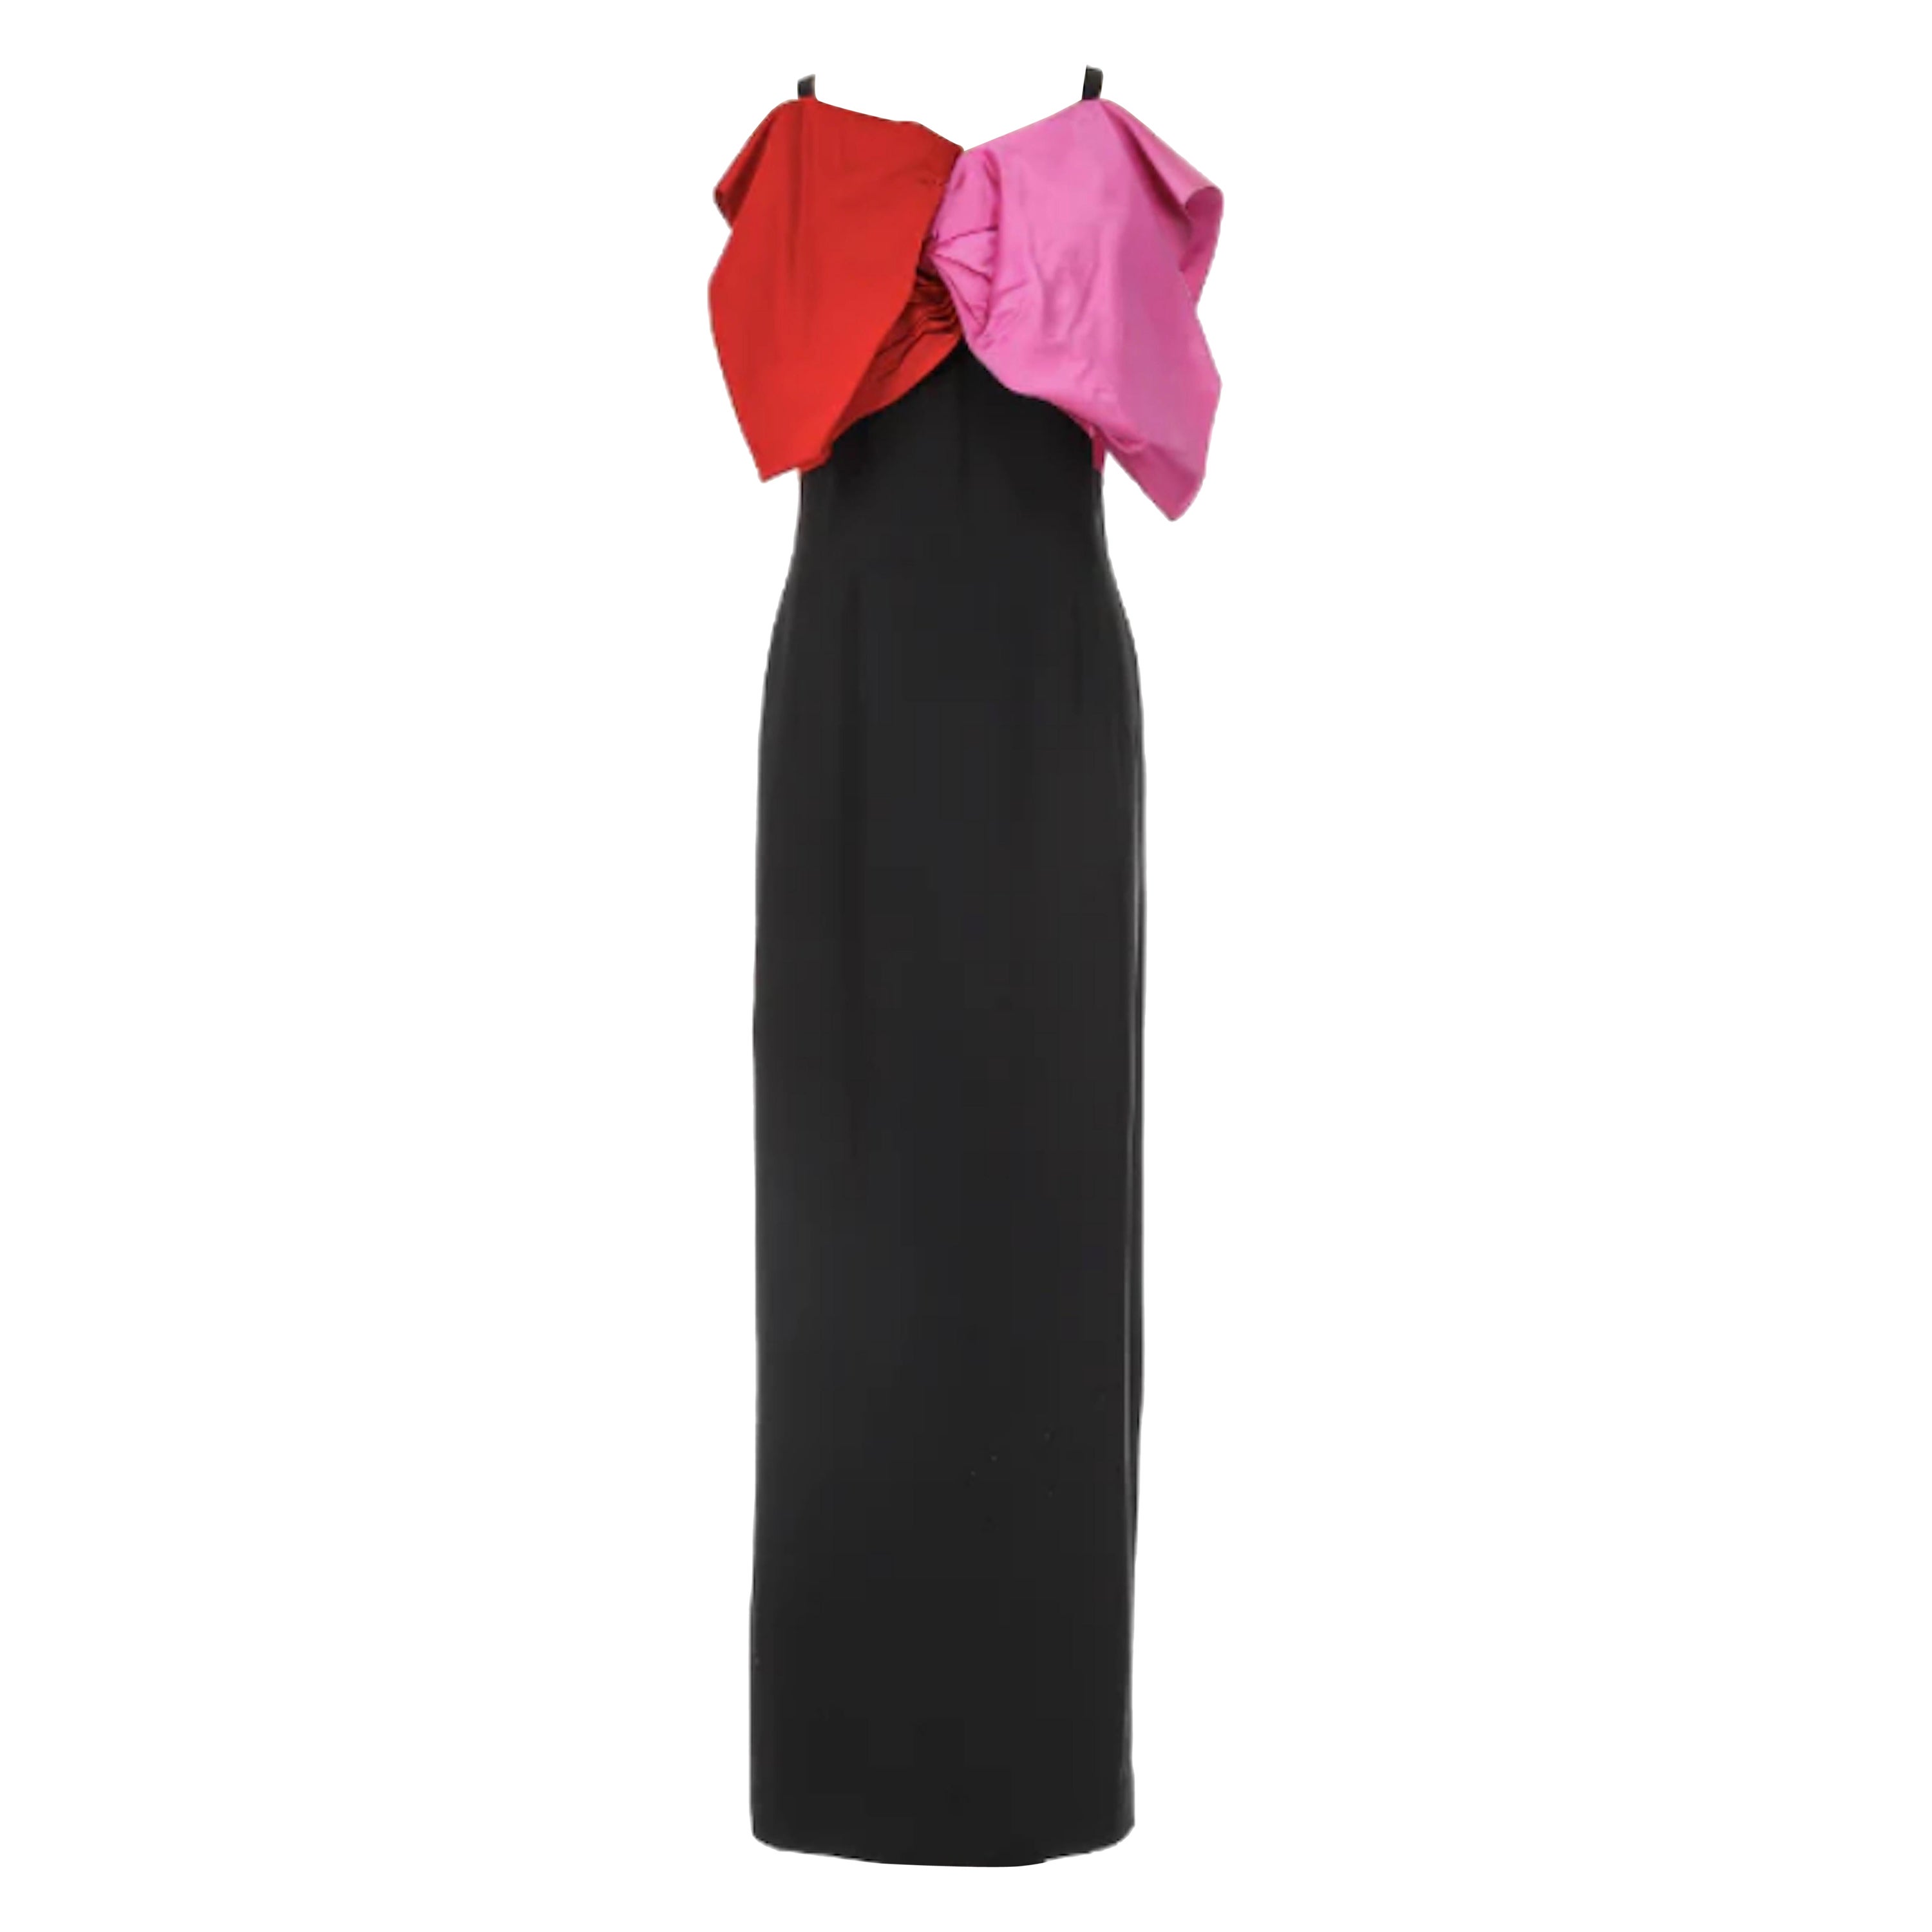 Bill Blass 1970's Black Evening Dress With Pink and Red Bow For Sale